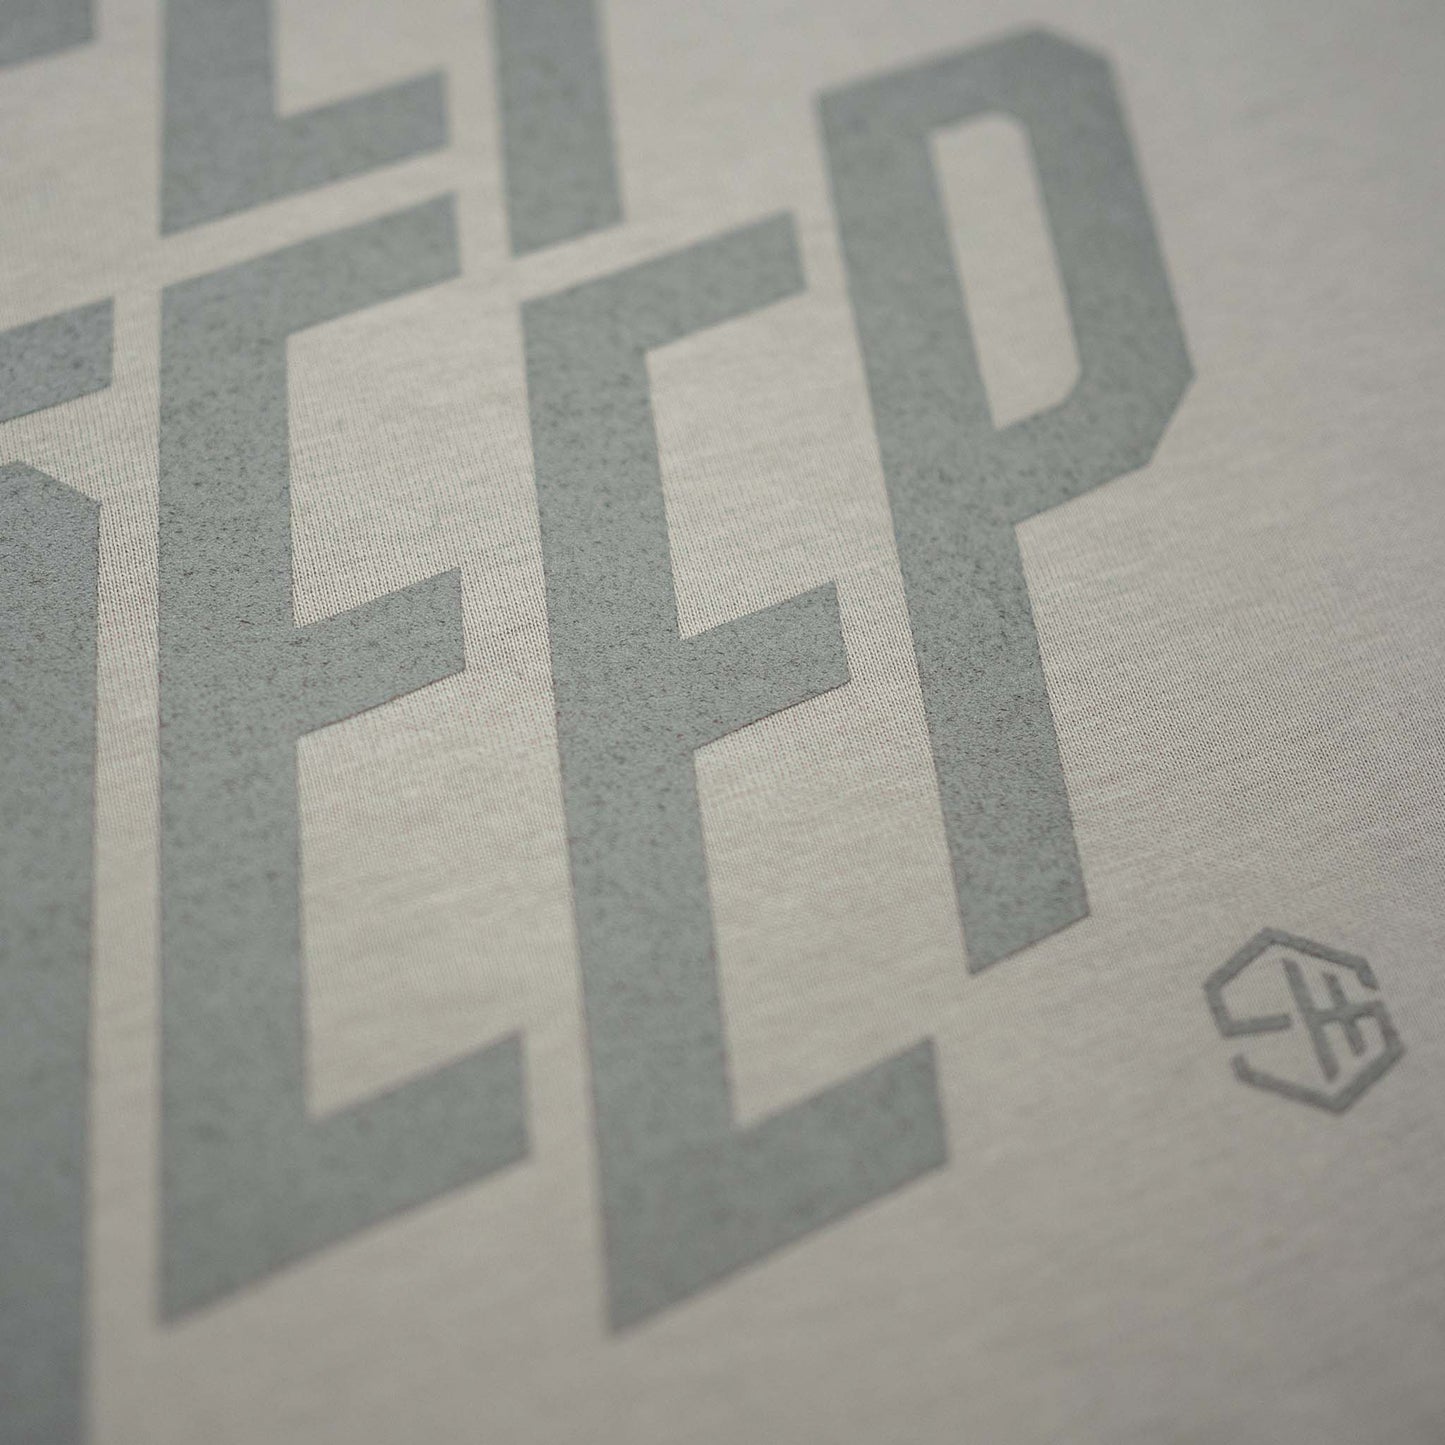 Keep Deep Opal Grey T-shirt detail of Silver Grey Typographic Design